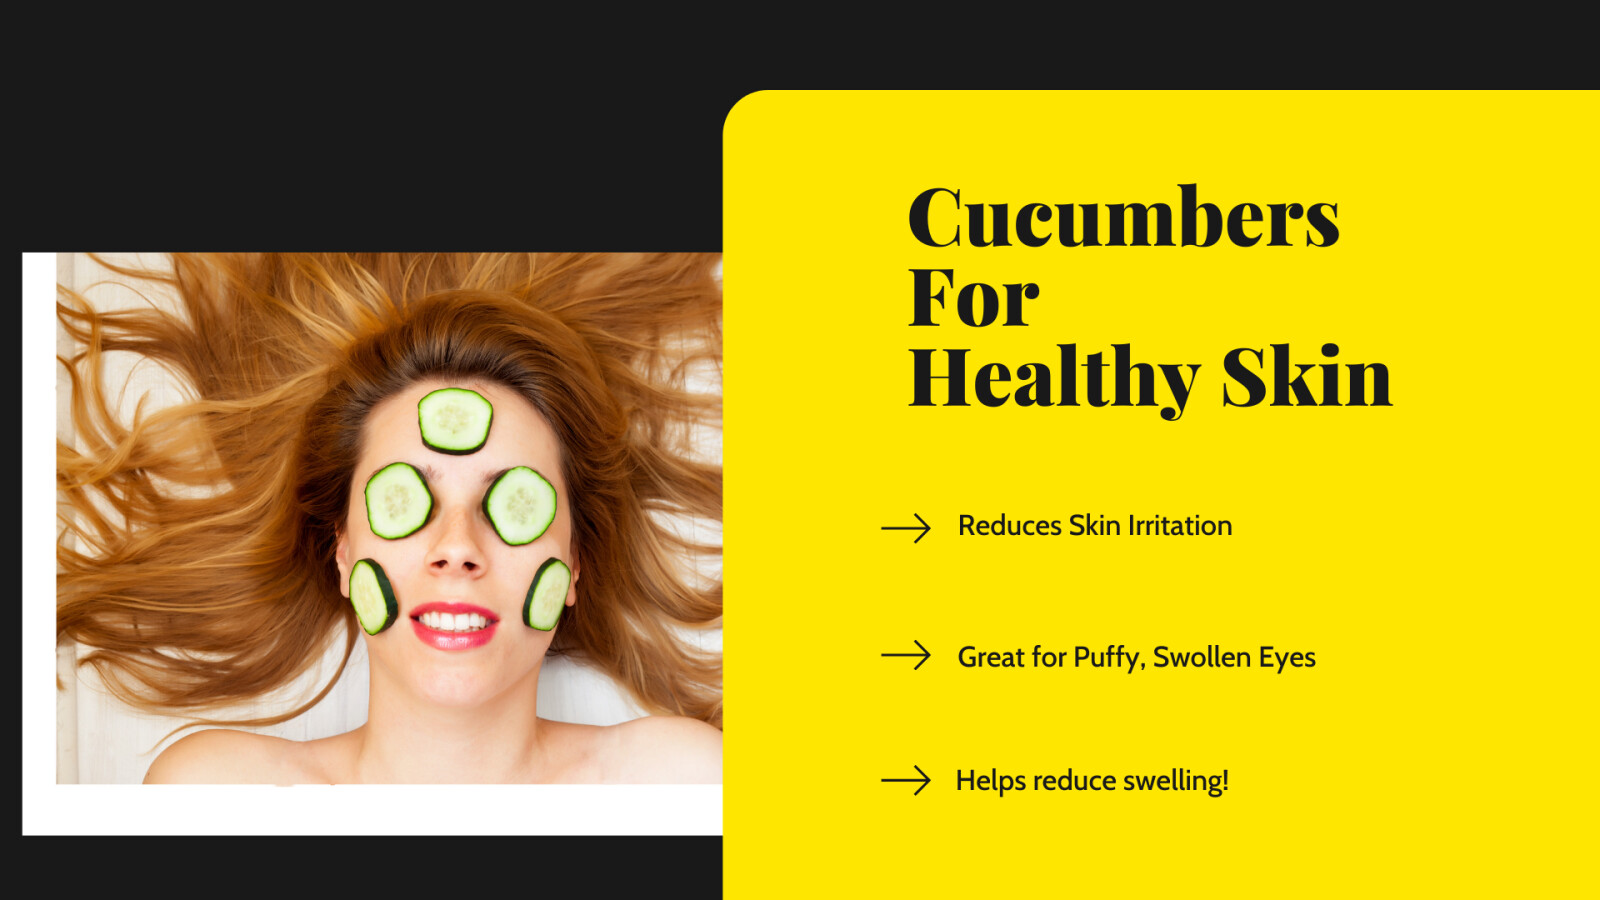 The Benefits of Cucumber